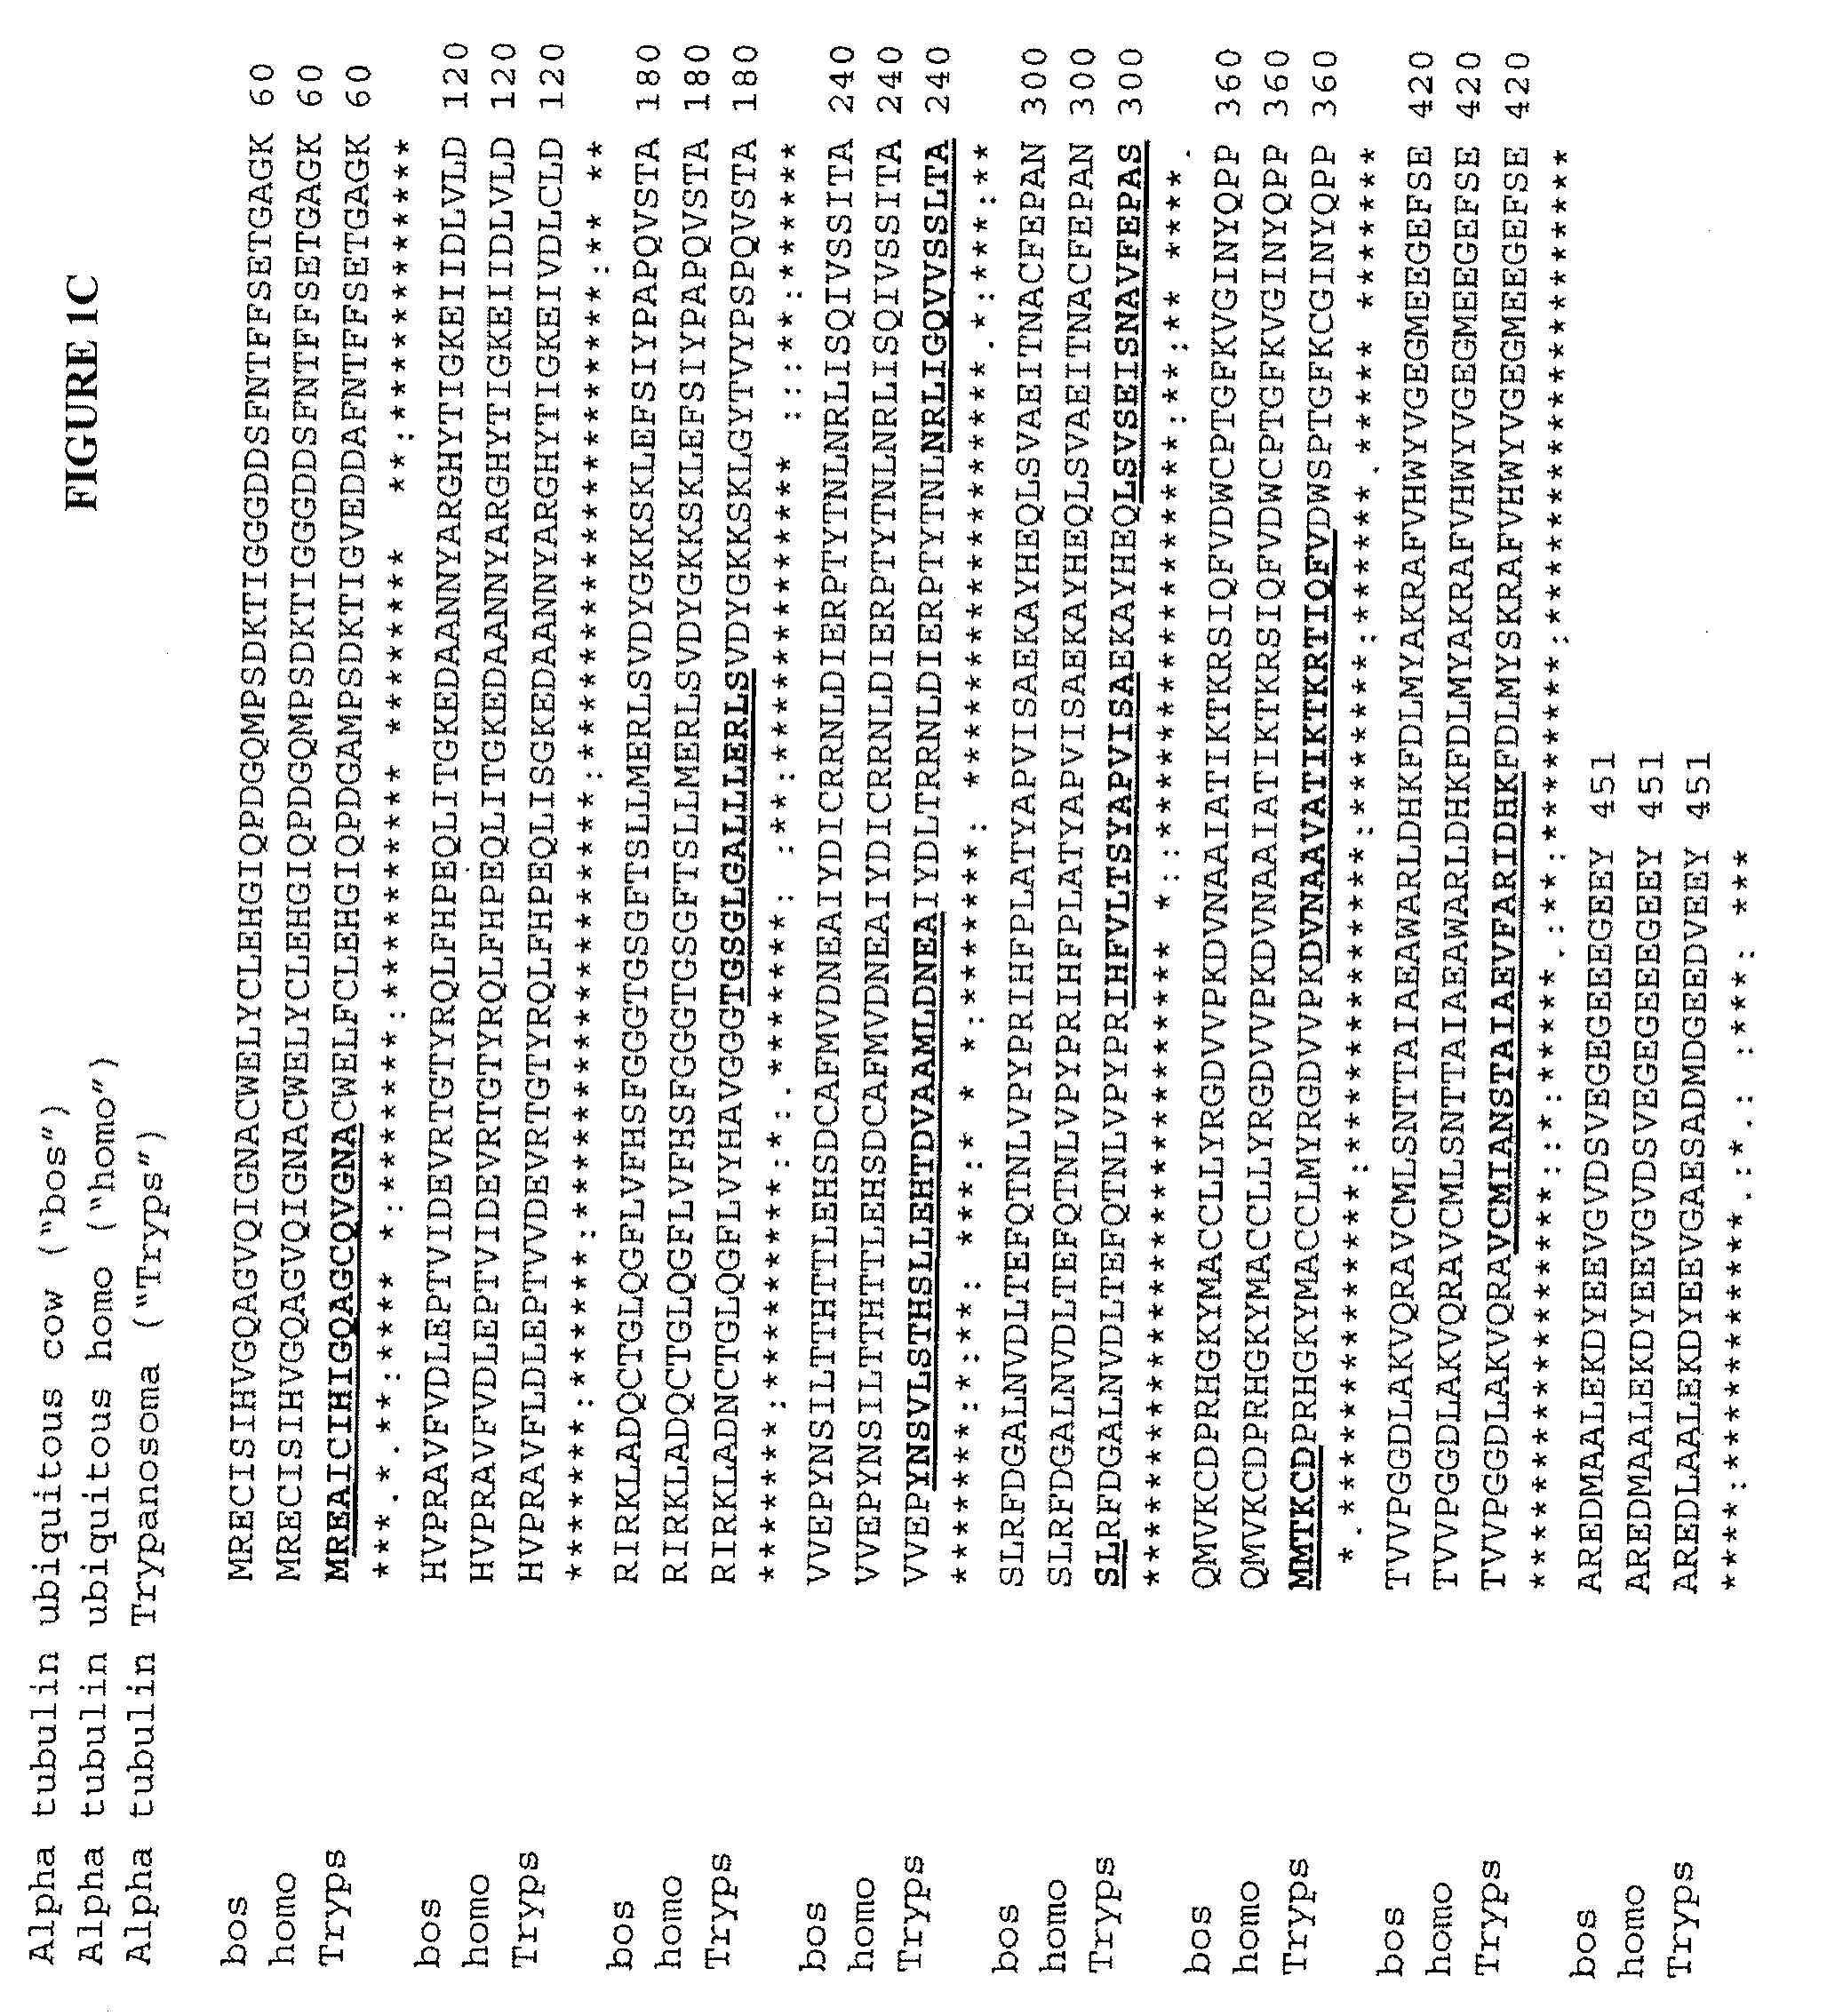 Trypanosoma Antigens, Vaccine Compositions, and Related Methods